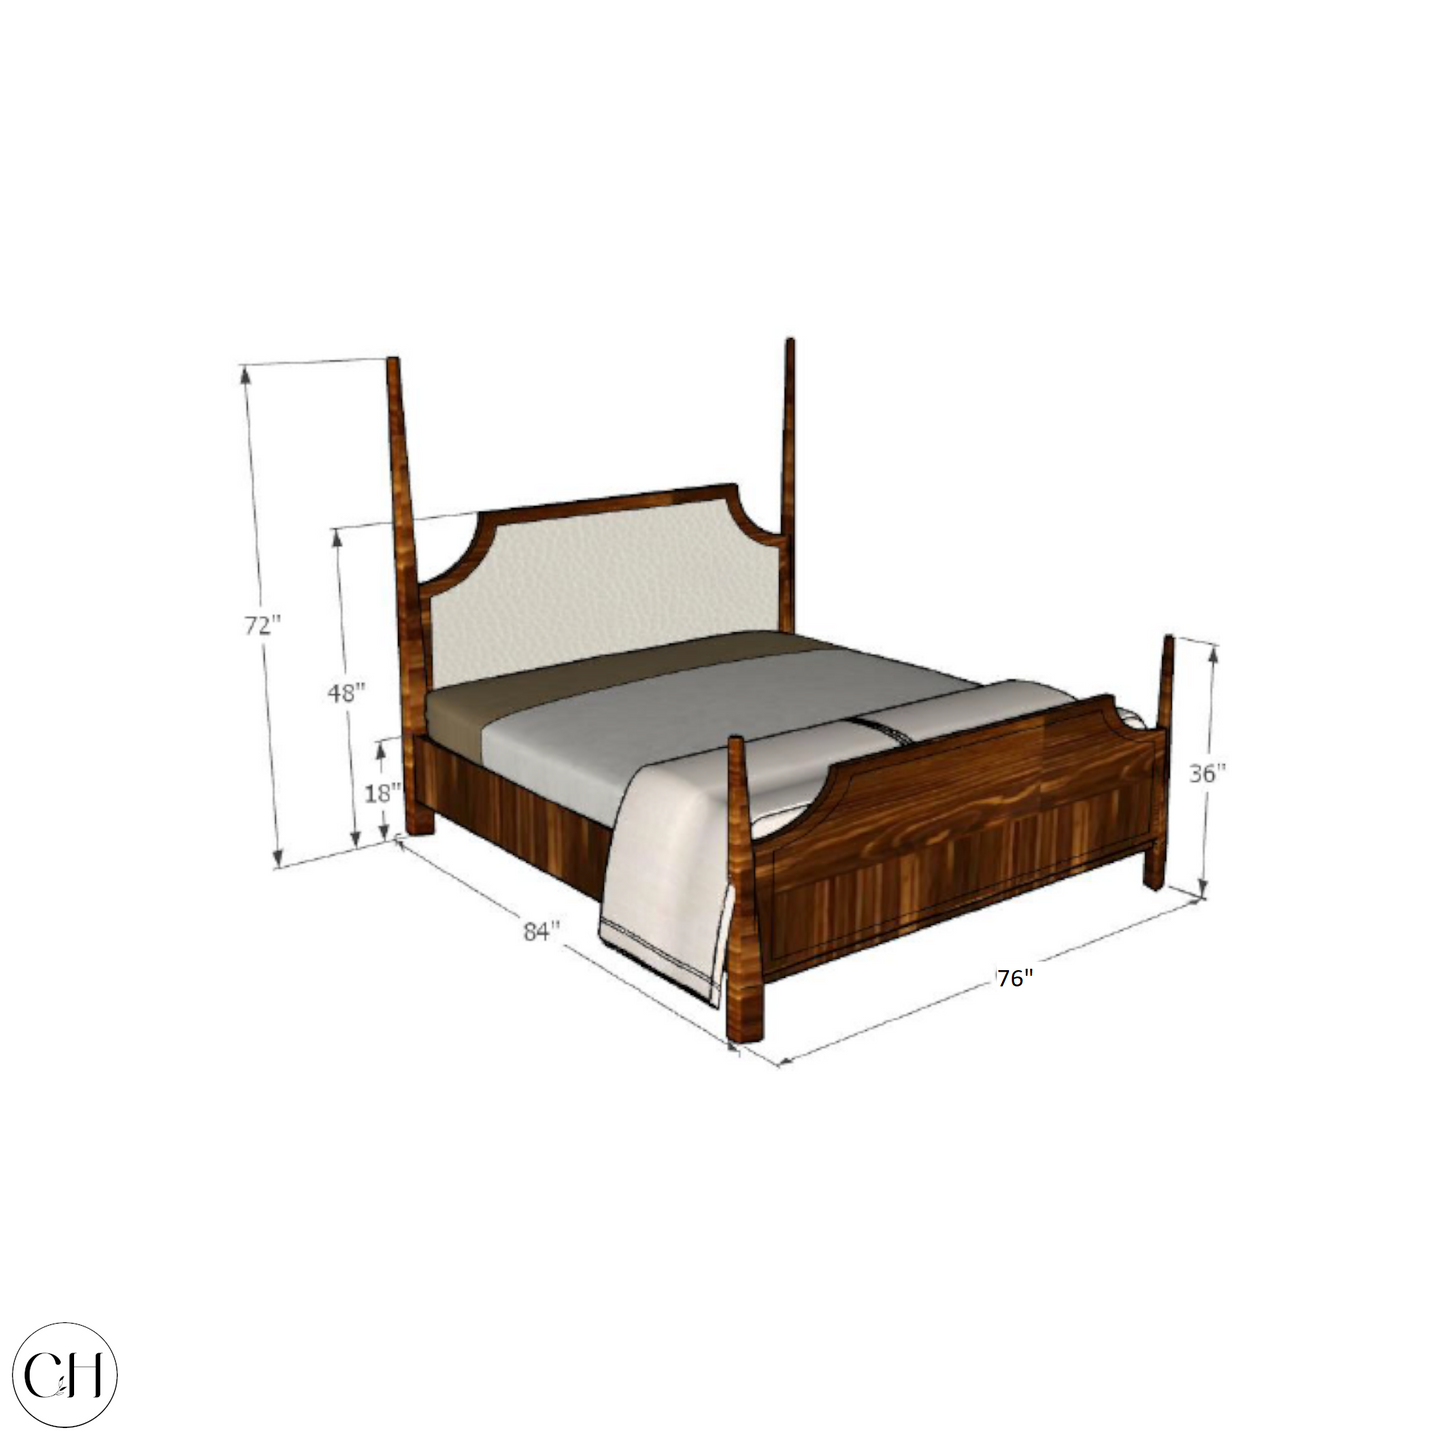 CustHum - 4-poster bed with upholstered headboard (dimensions, king-size)